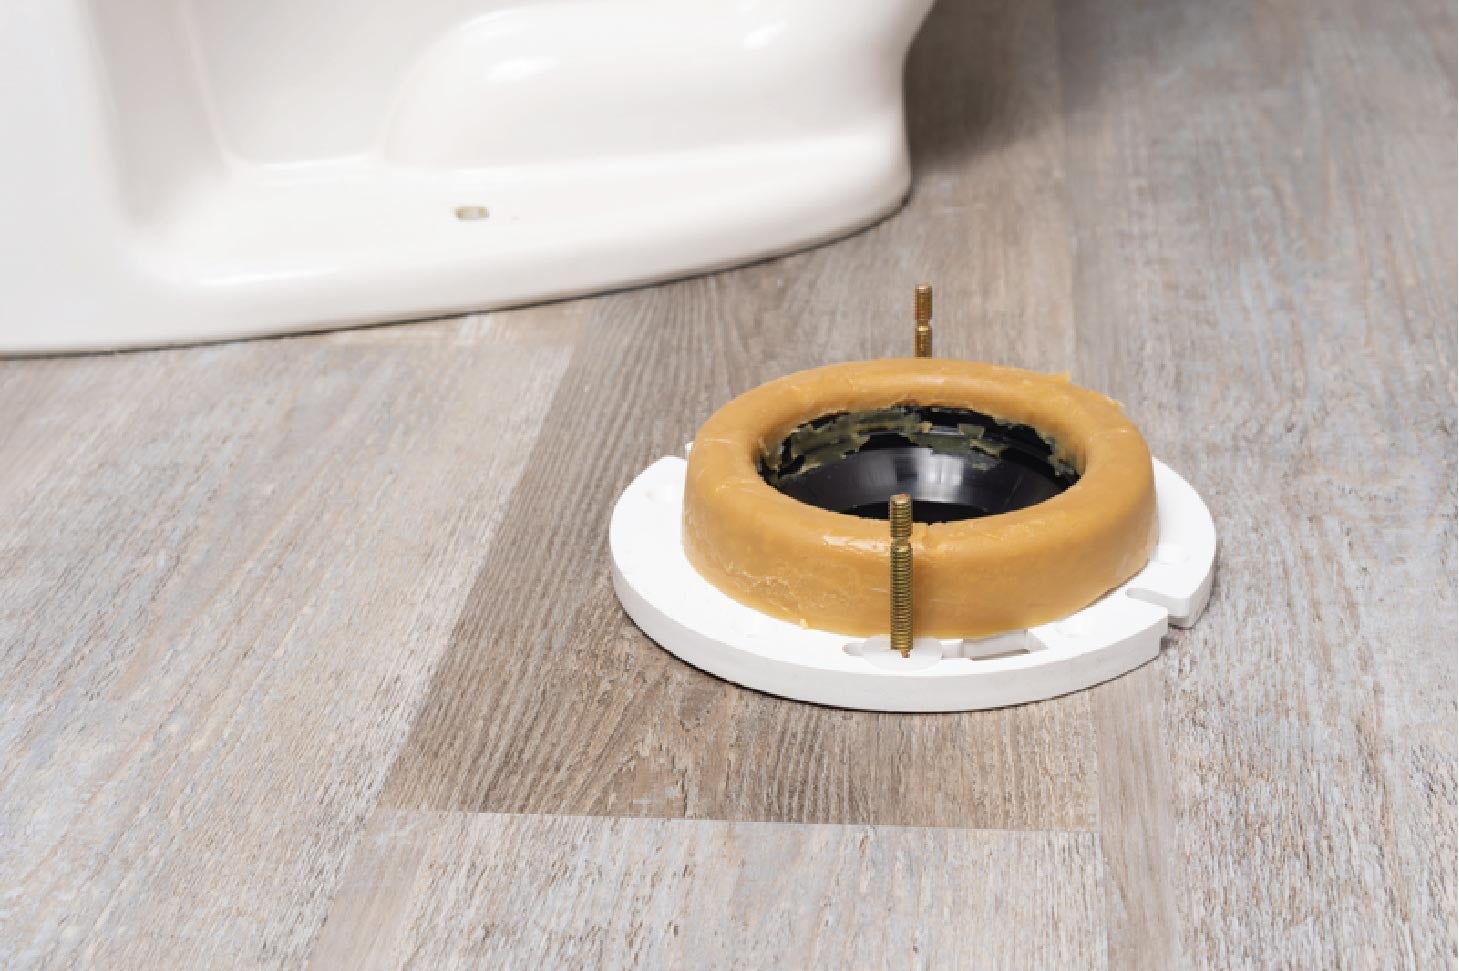 I. Introduction to Toilet Flange Placement